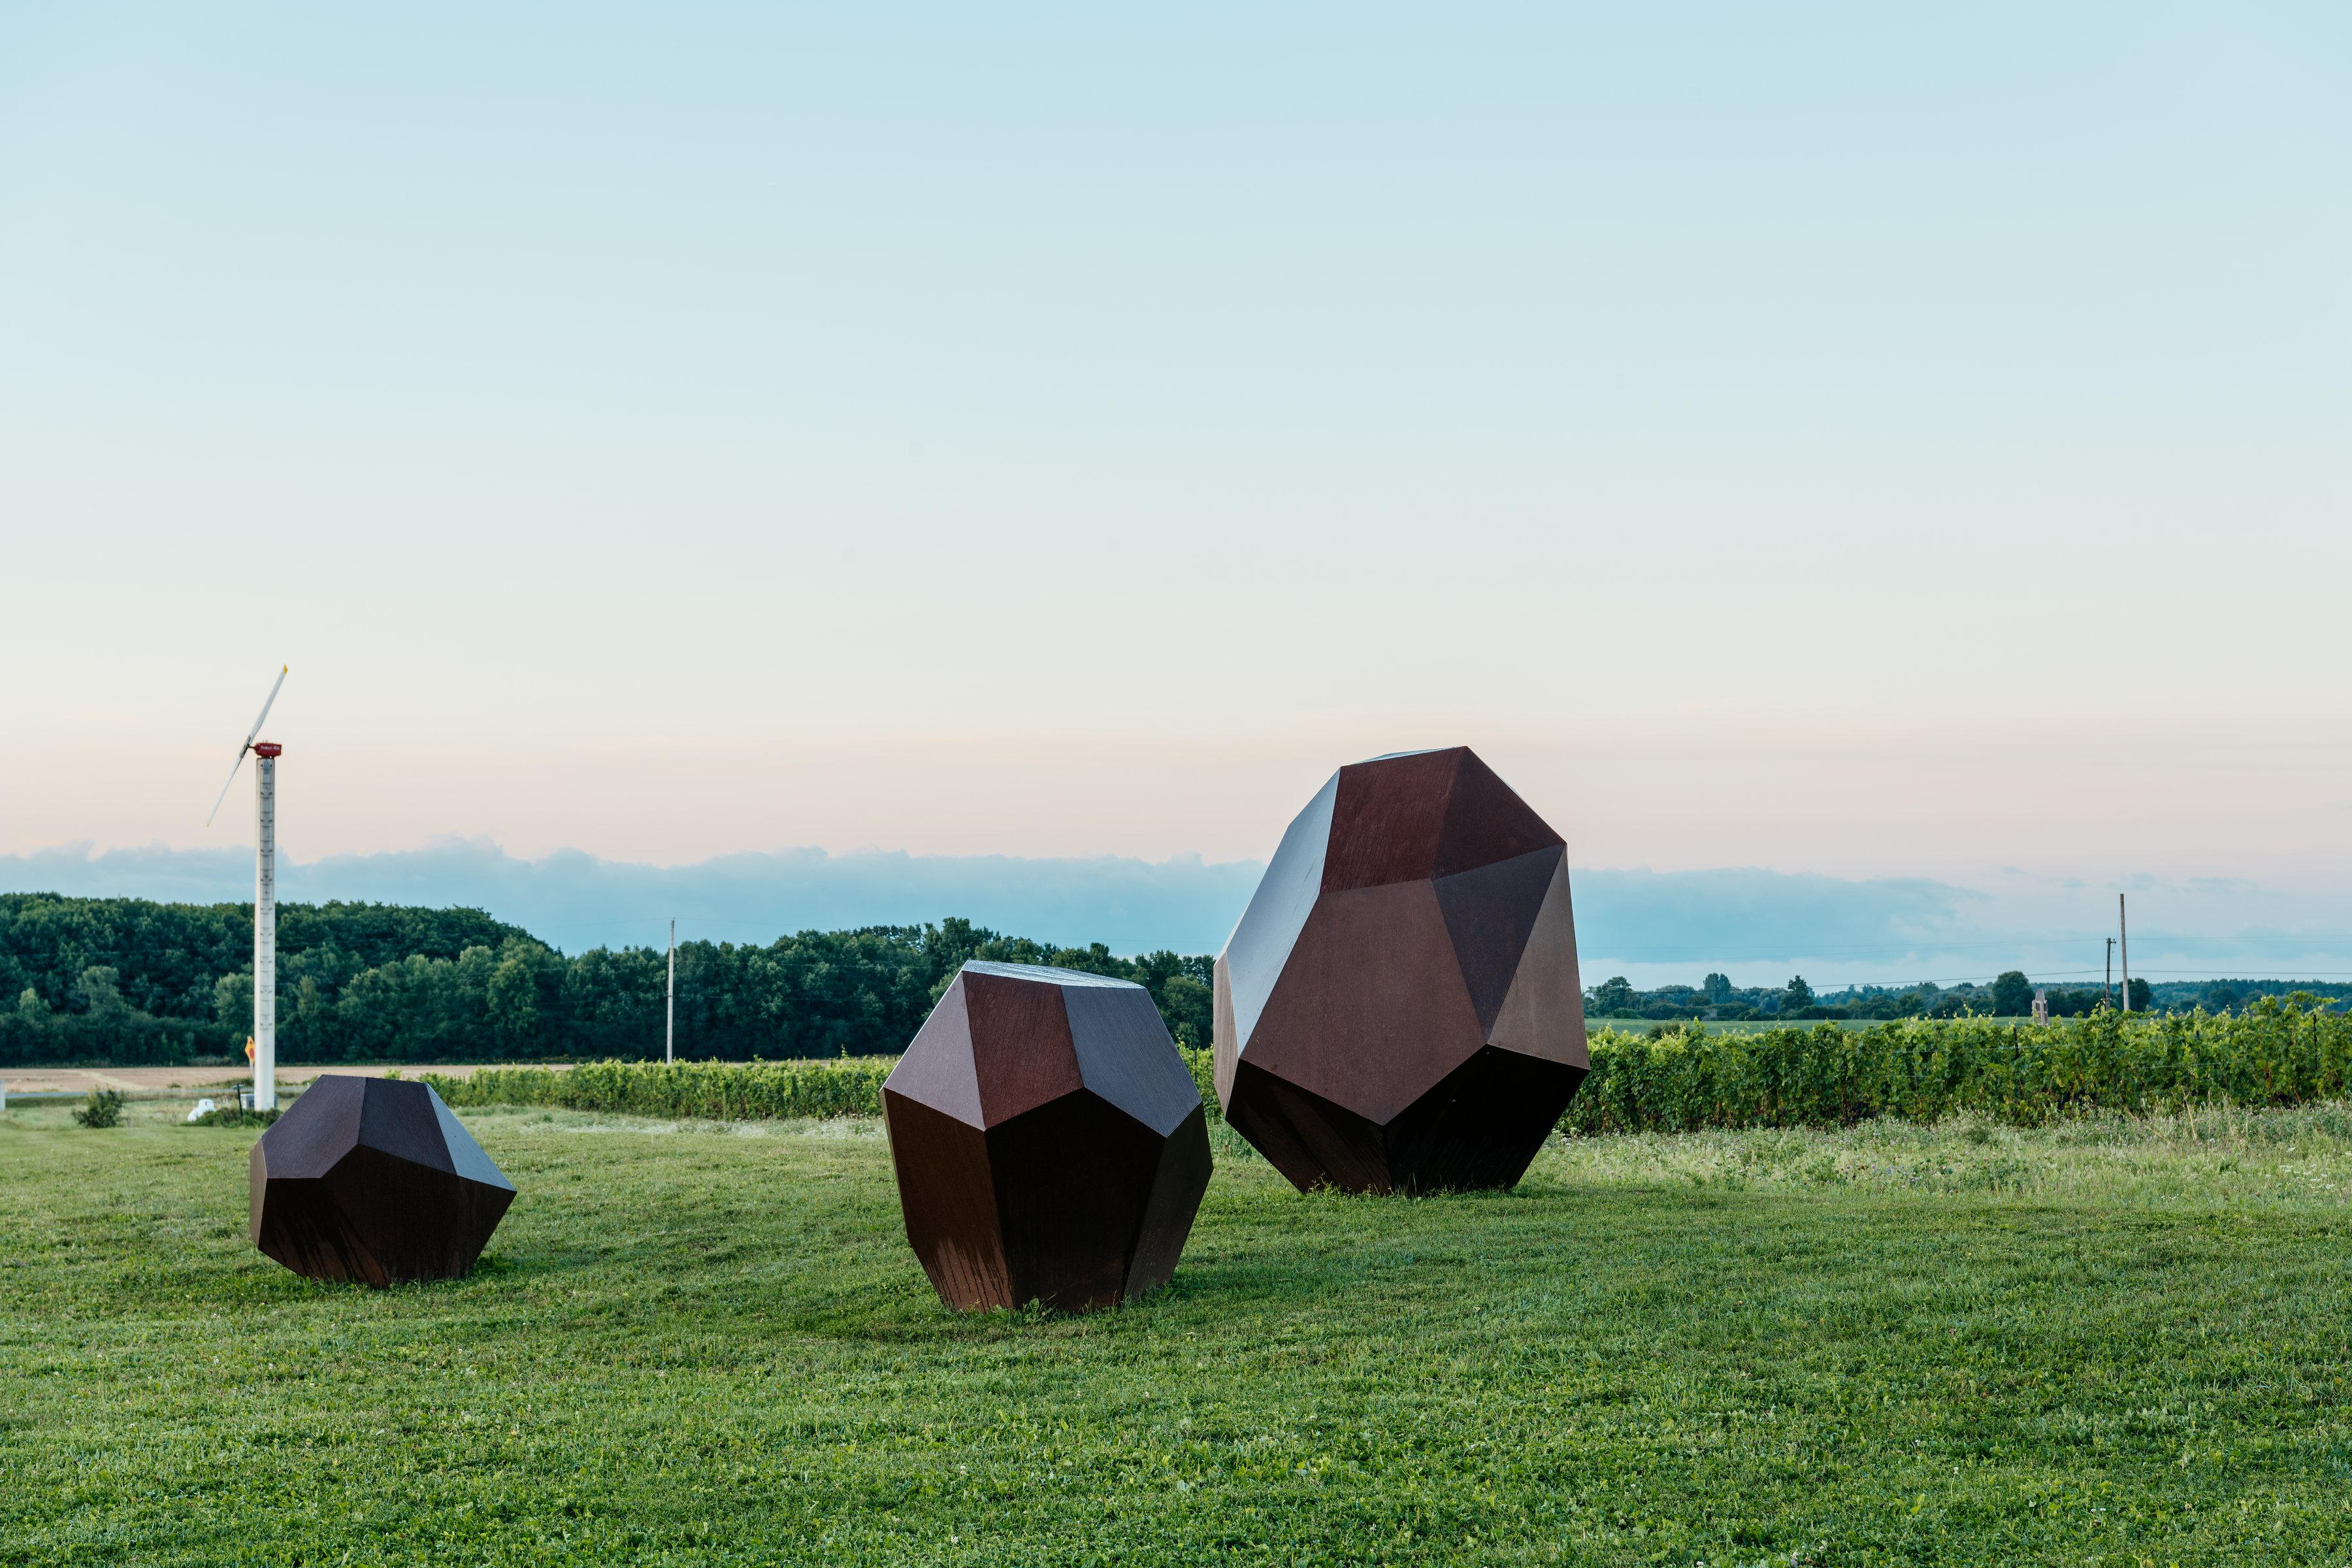 This large scale outdoor installation by Shayne Dark consists of three hollow, polygonal corten steel boulders called Drop Stones that have a rusted, weathered patina. The works represent erratics, geometric stones shaped and carried often hundreds